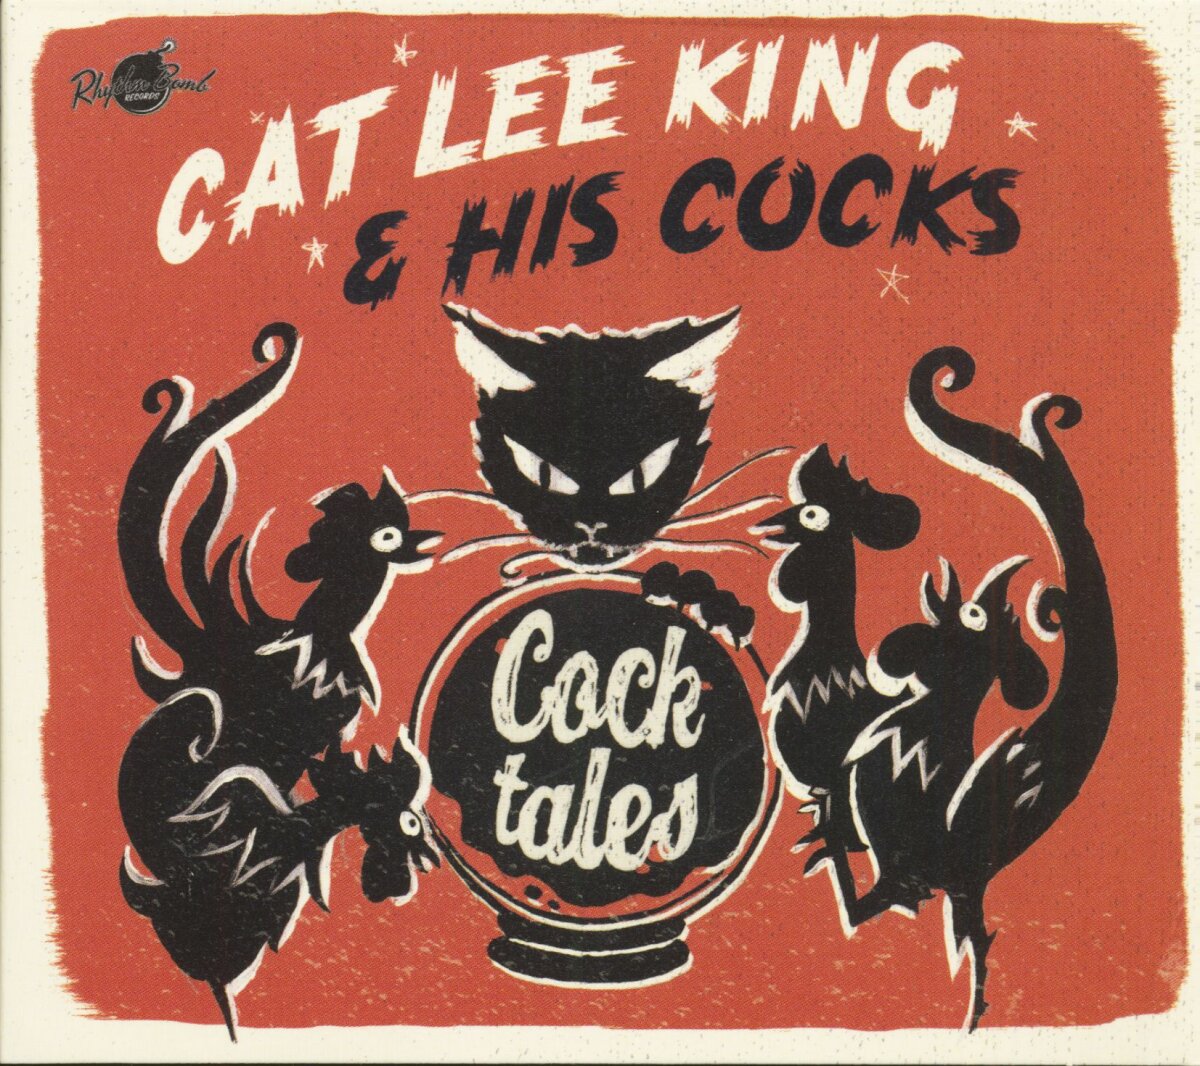 Cat Lee King And His Cocks Cock Tales Cd 14 28